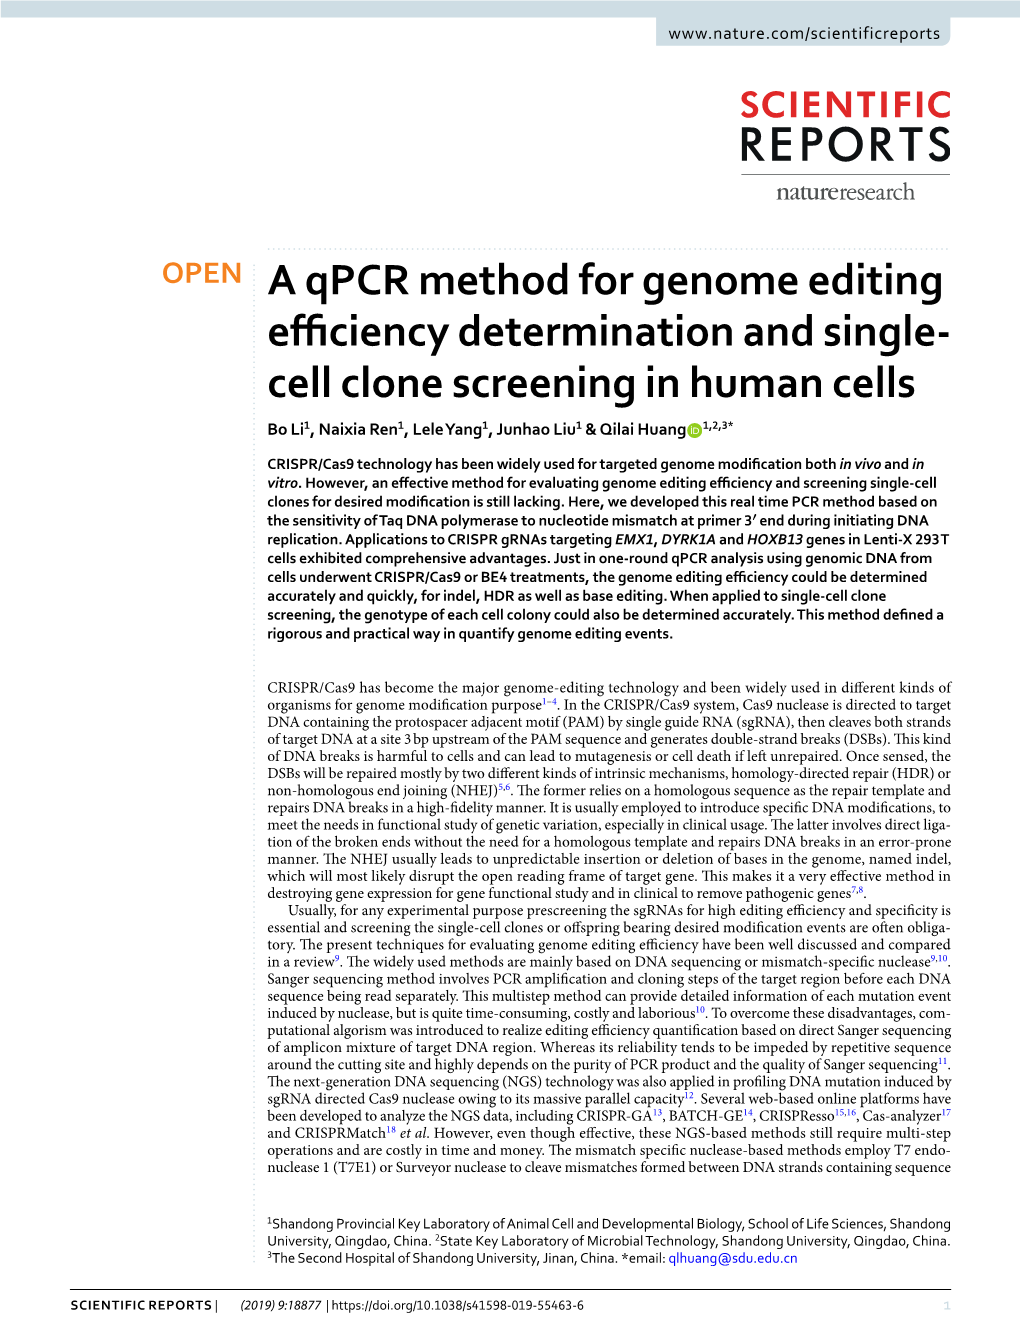 A Qpcr Method for Genome Editing Efficiency Determination and Single